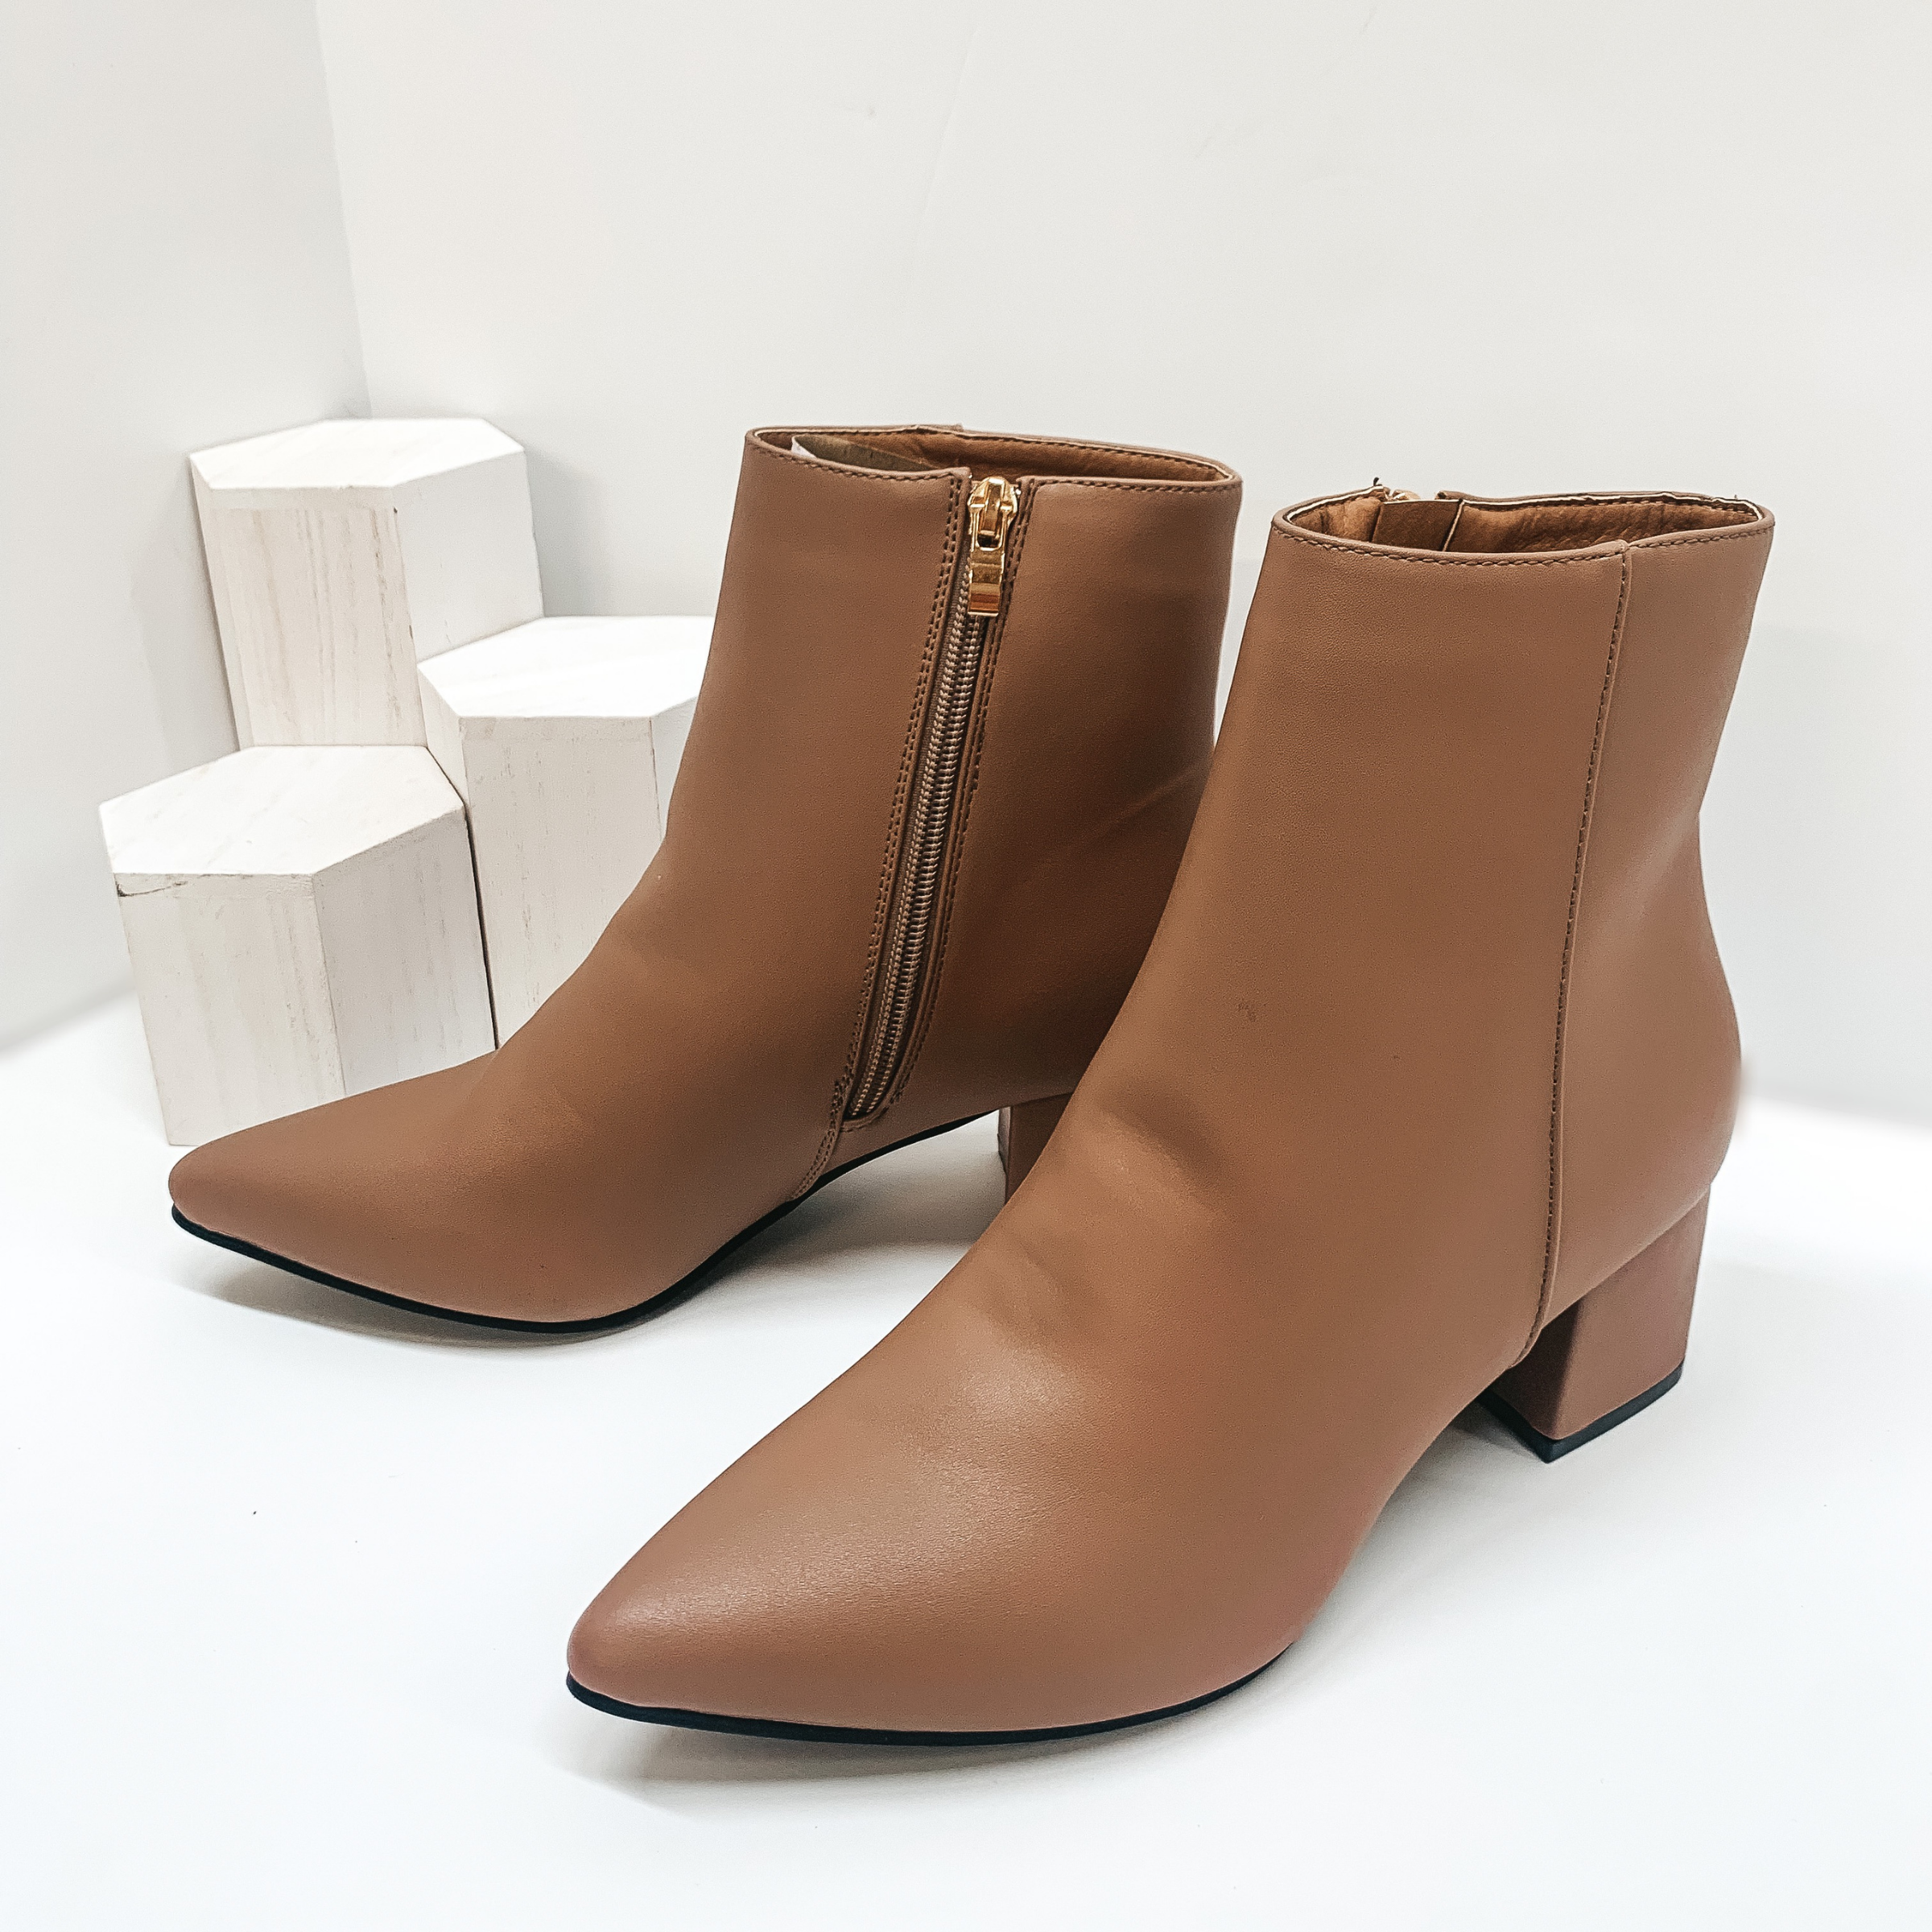 Step Into Style Pointed Toe Ankle Booties in Burlwood - Giddy Up Glamour Boutique